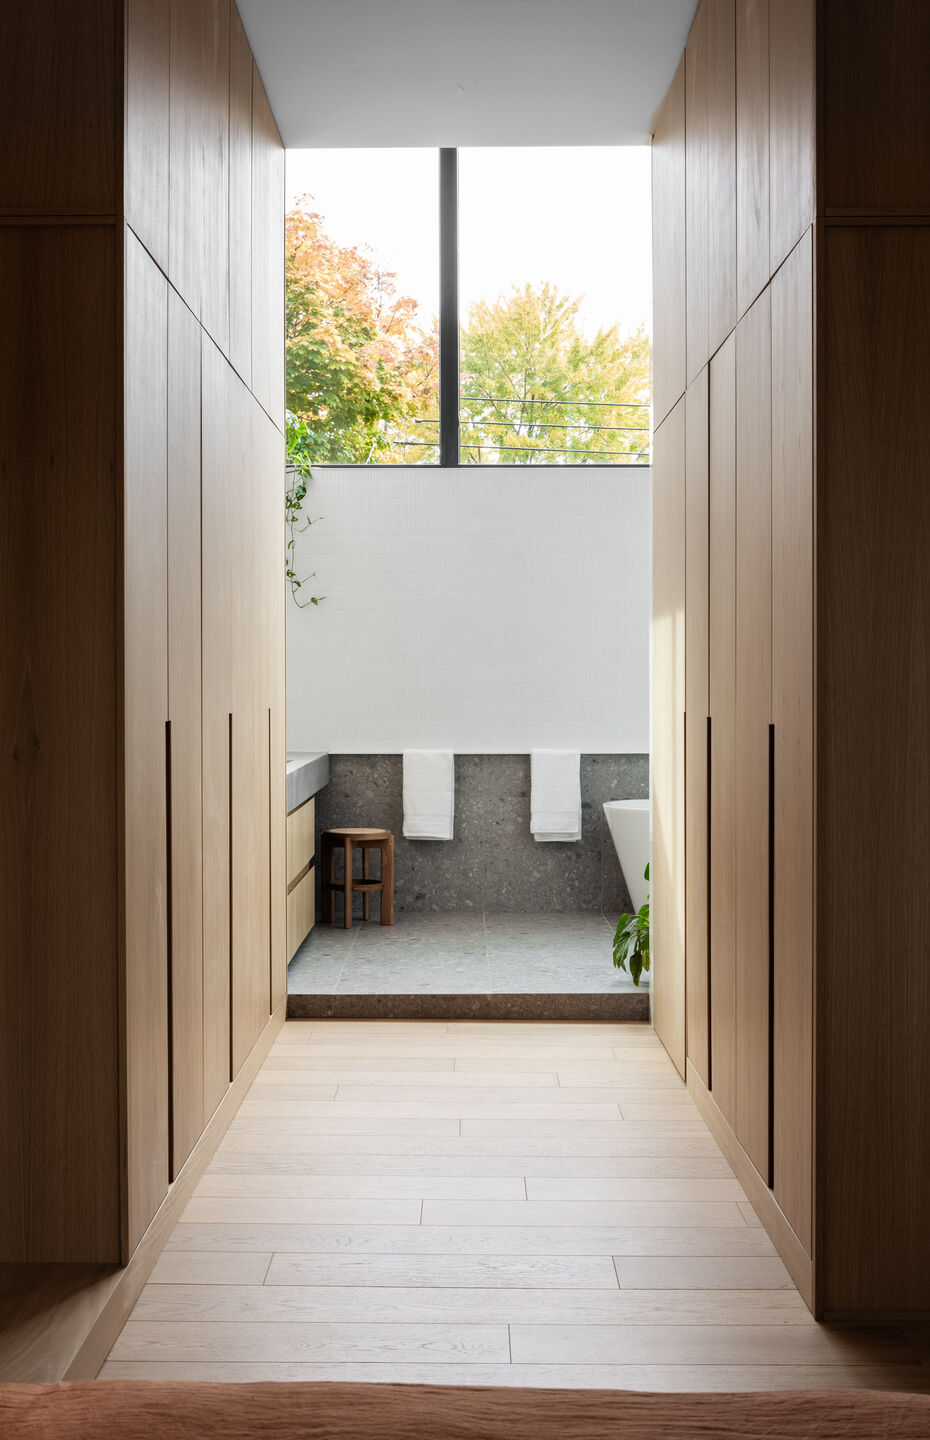 Toilette entrance with wooden closets on both sides